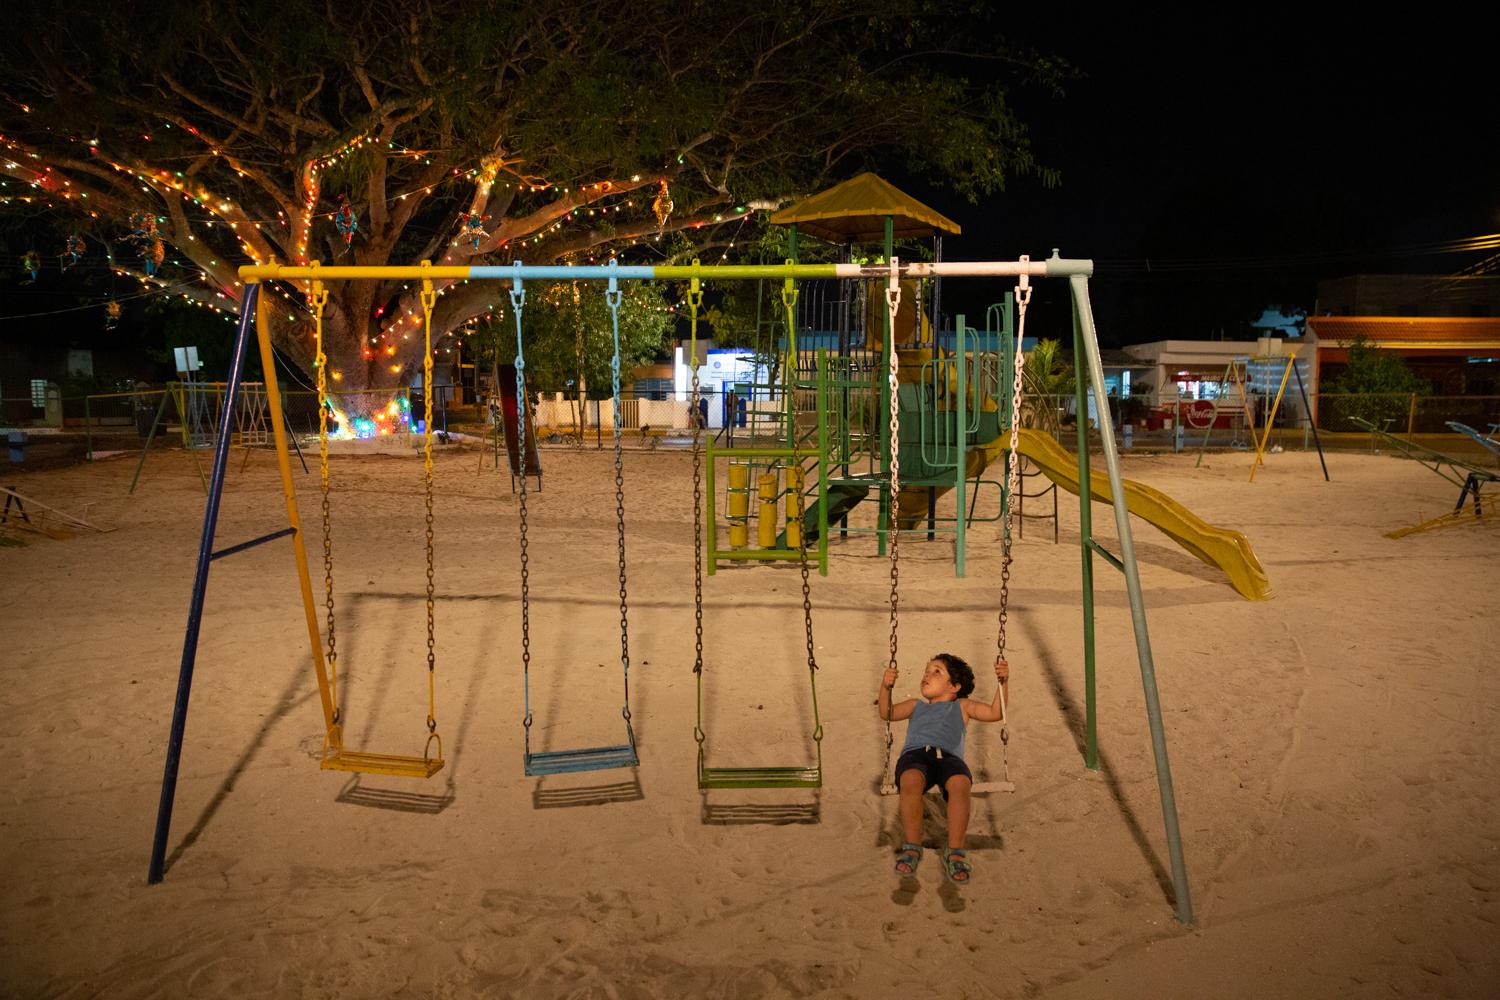 Thiago playing on a swing in an...uring the coronavirus pandemic.